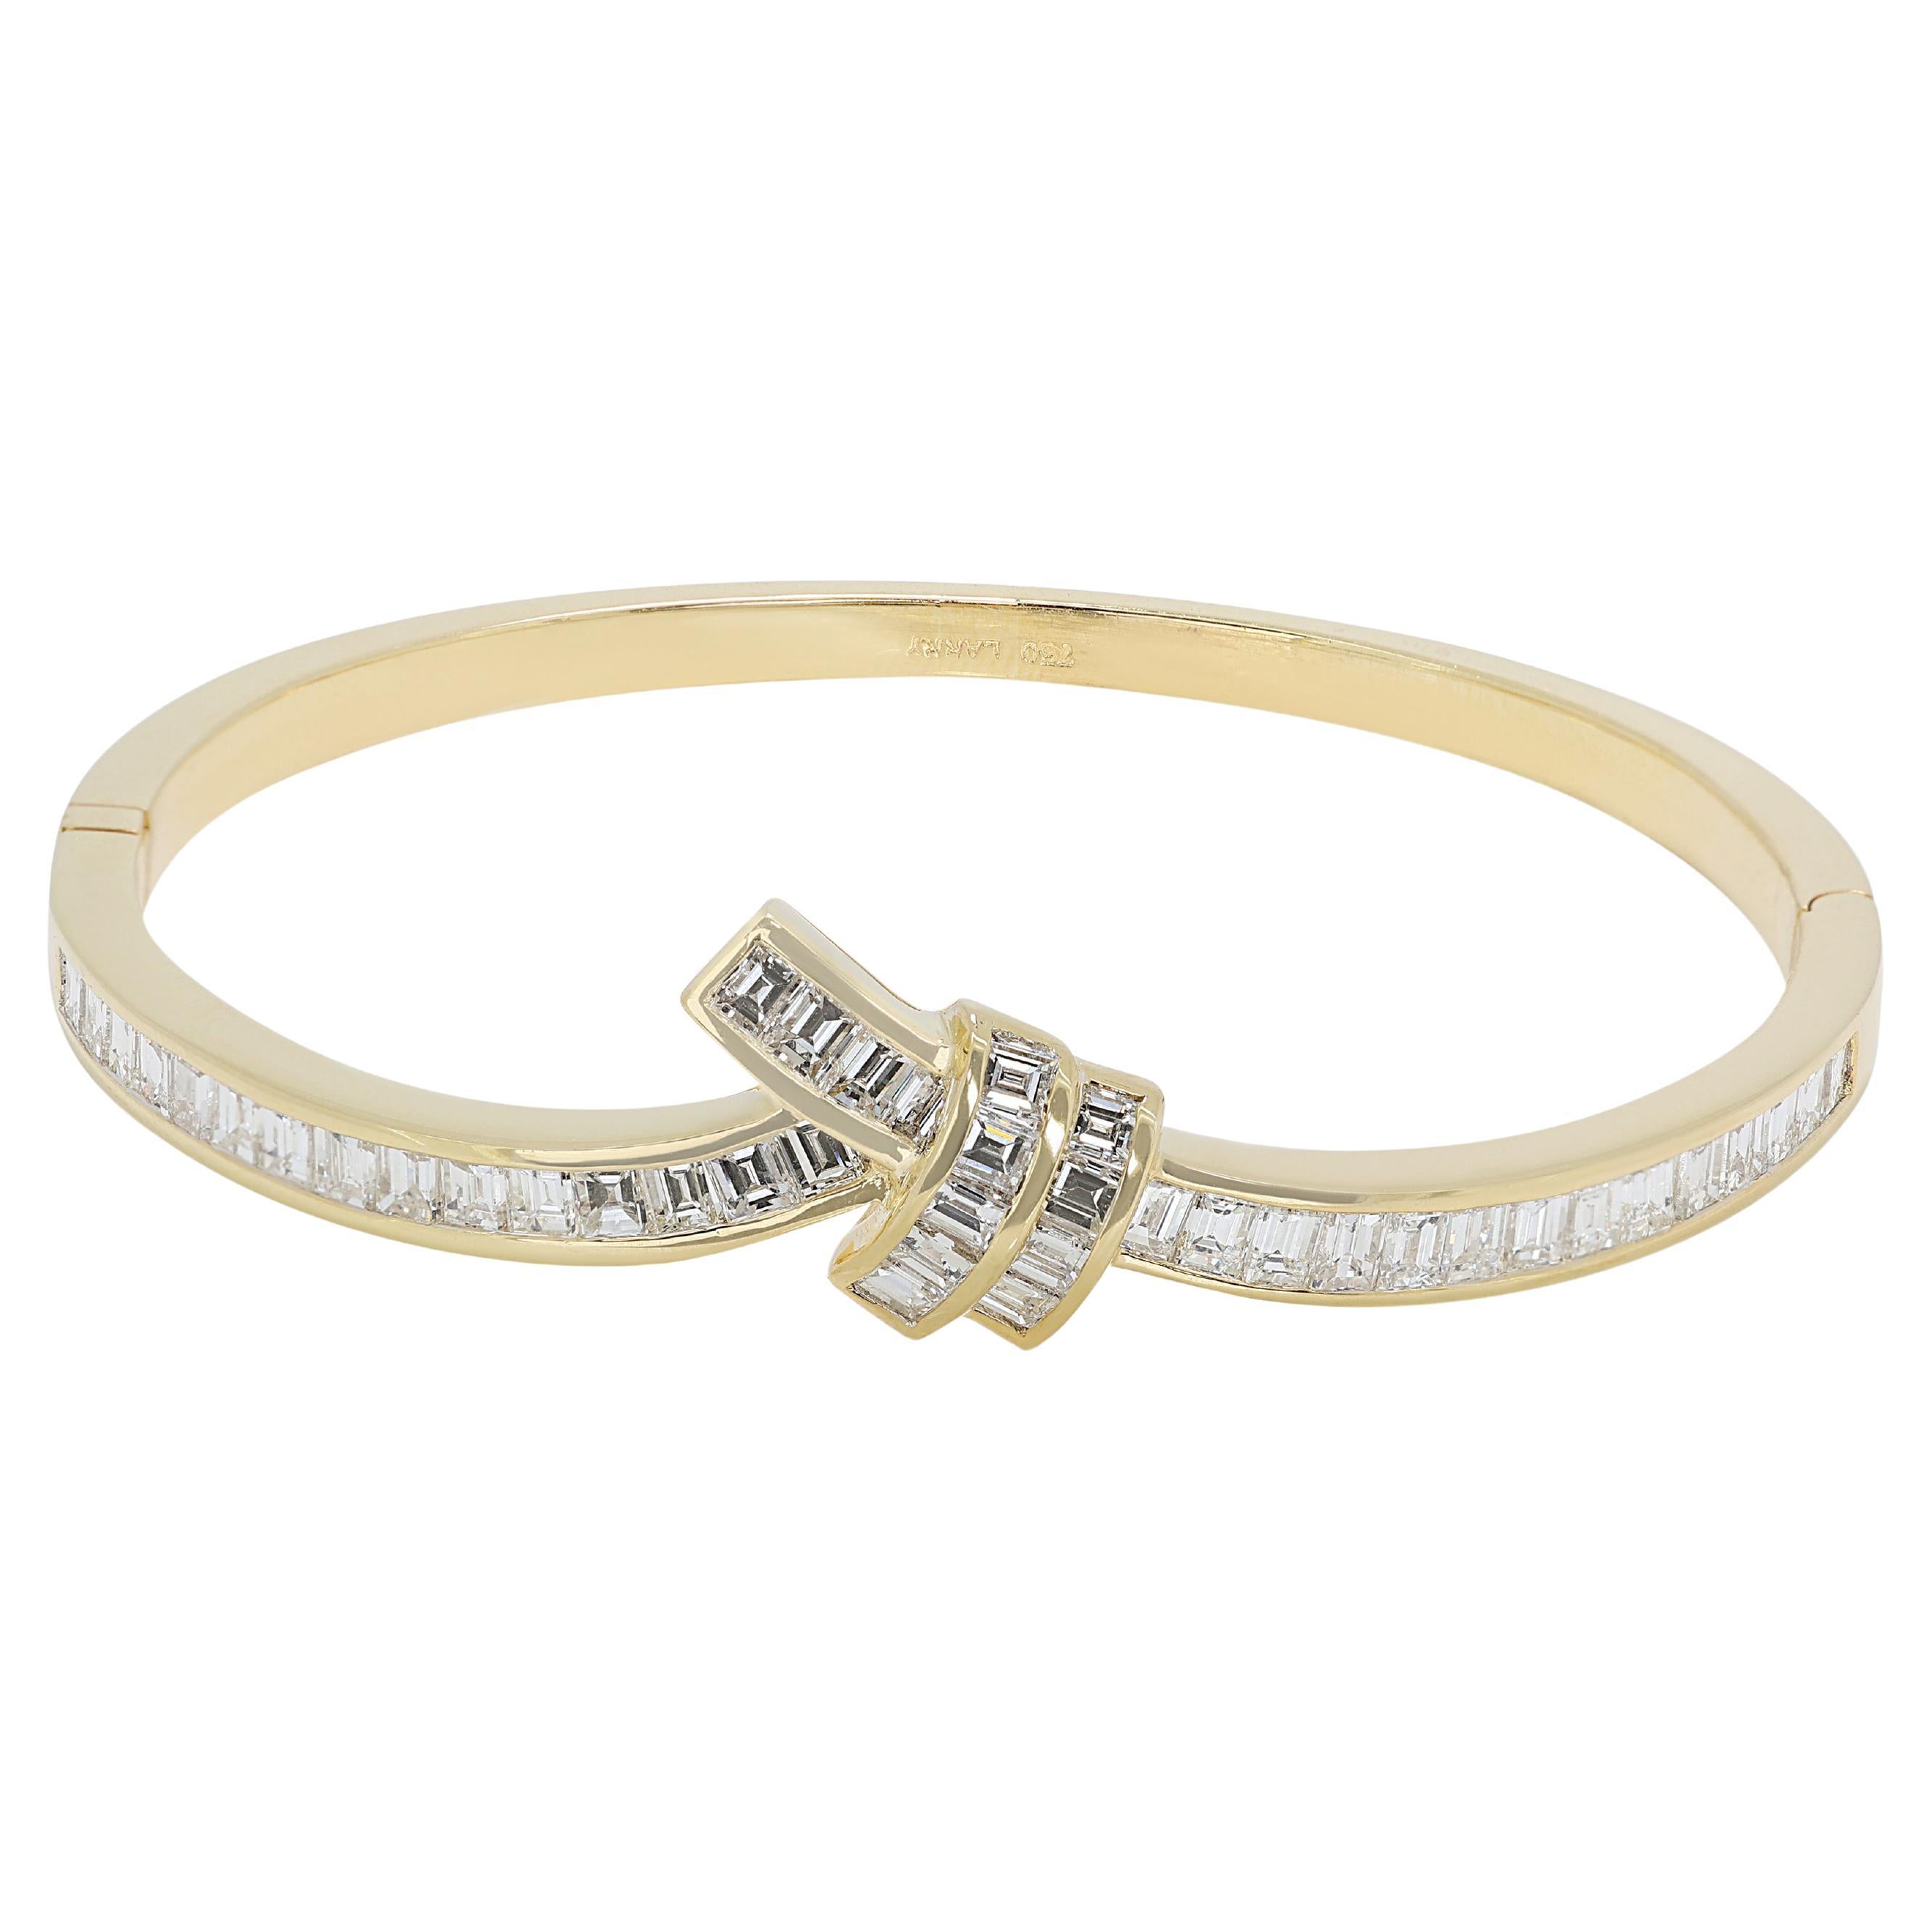 Fascinating 6.15ct Diamonds Clasp Bracelet in 18K Yellow Gold For Sale